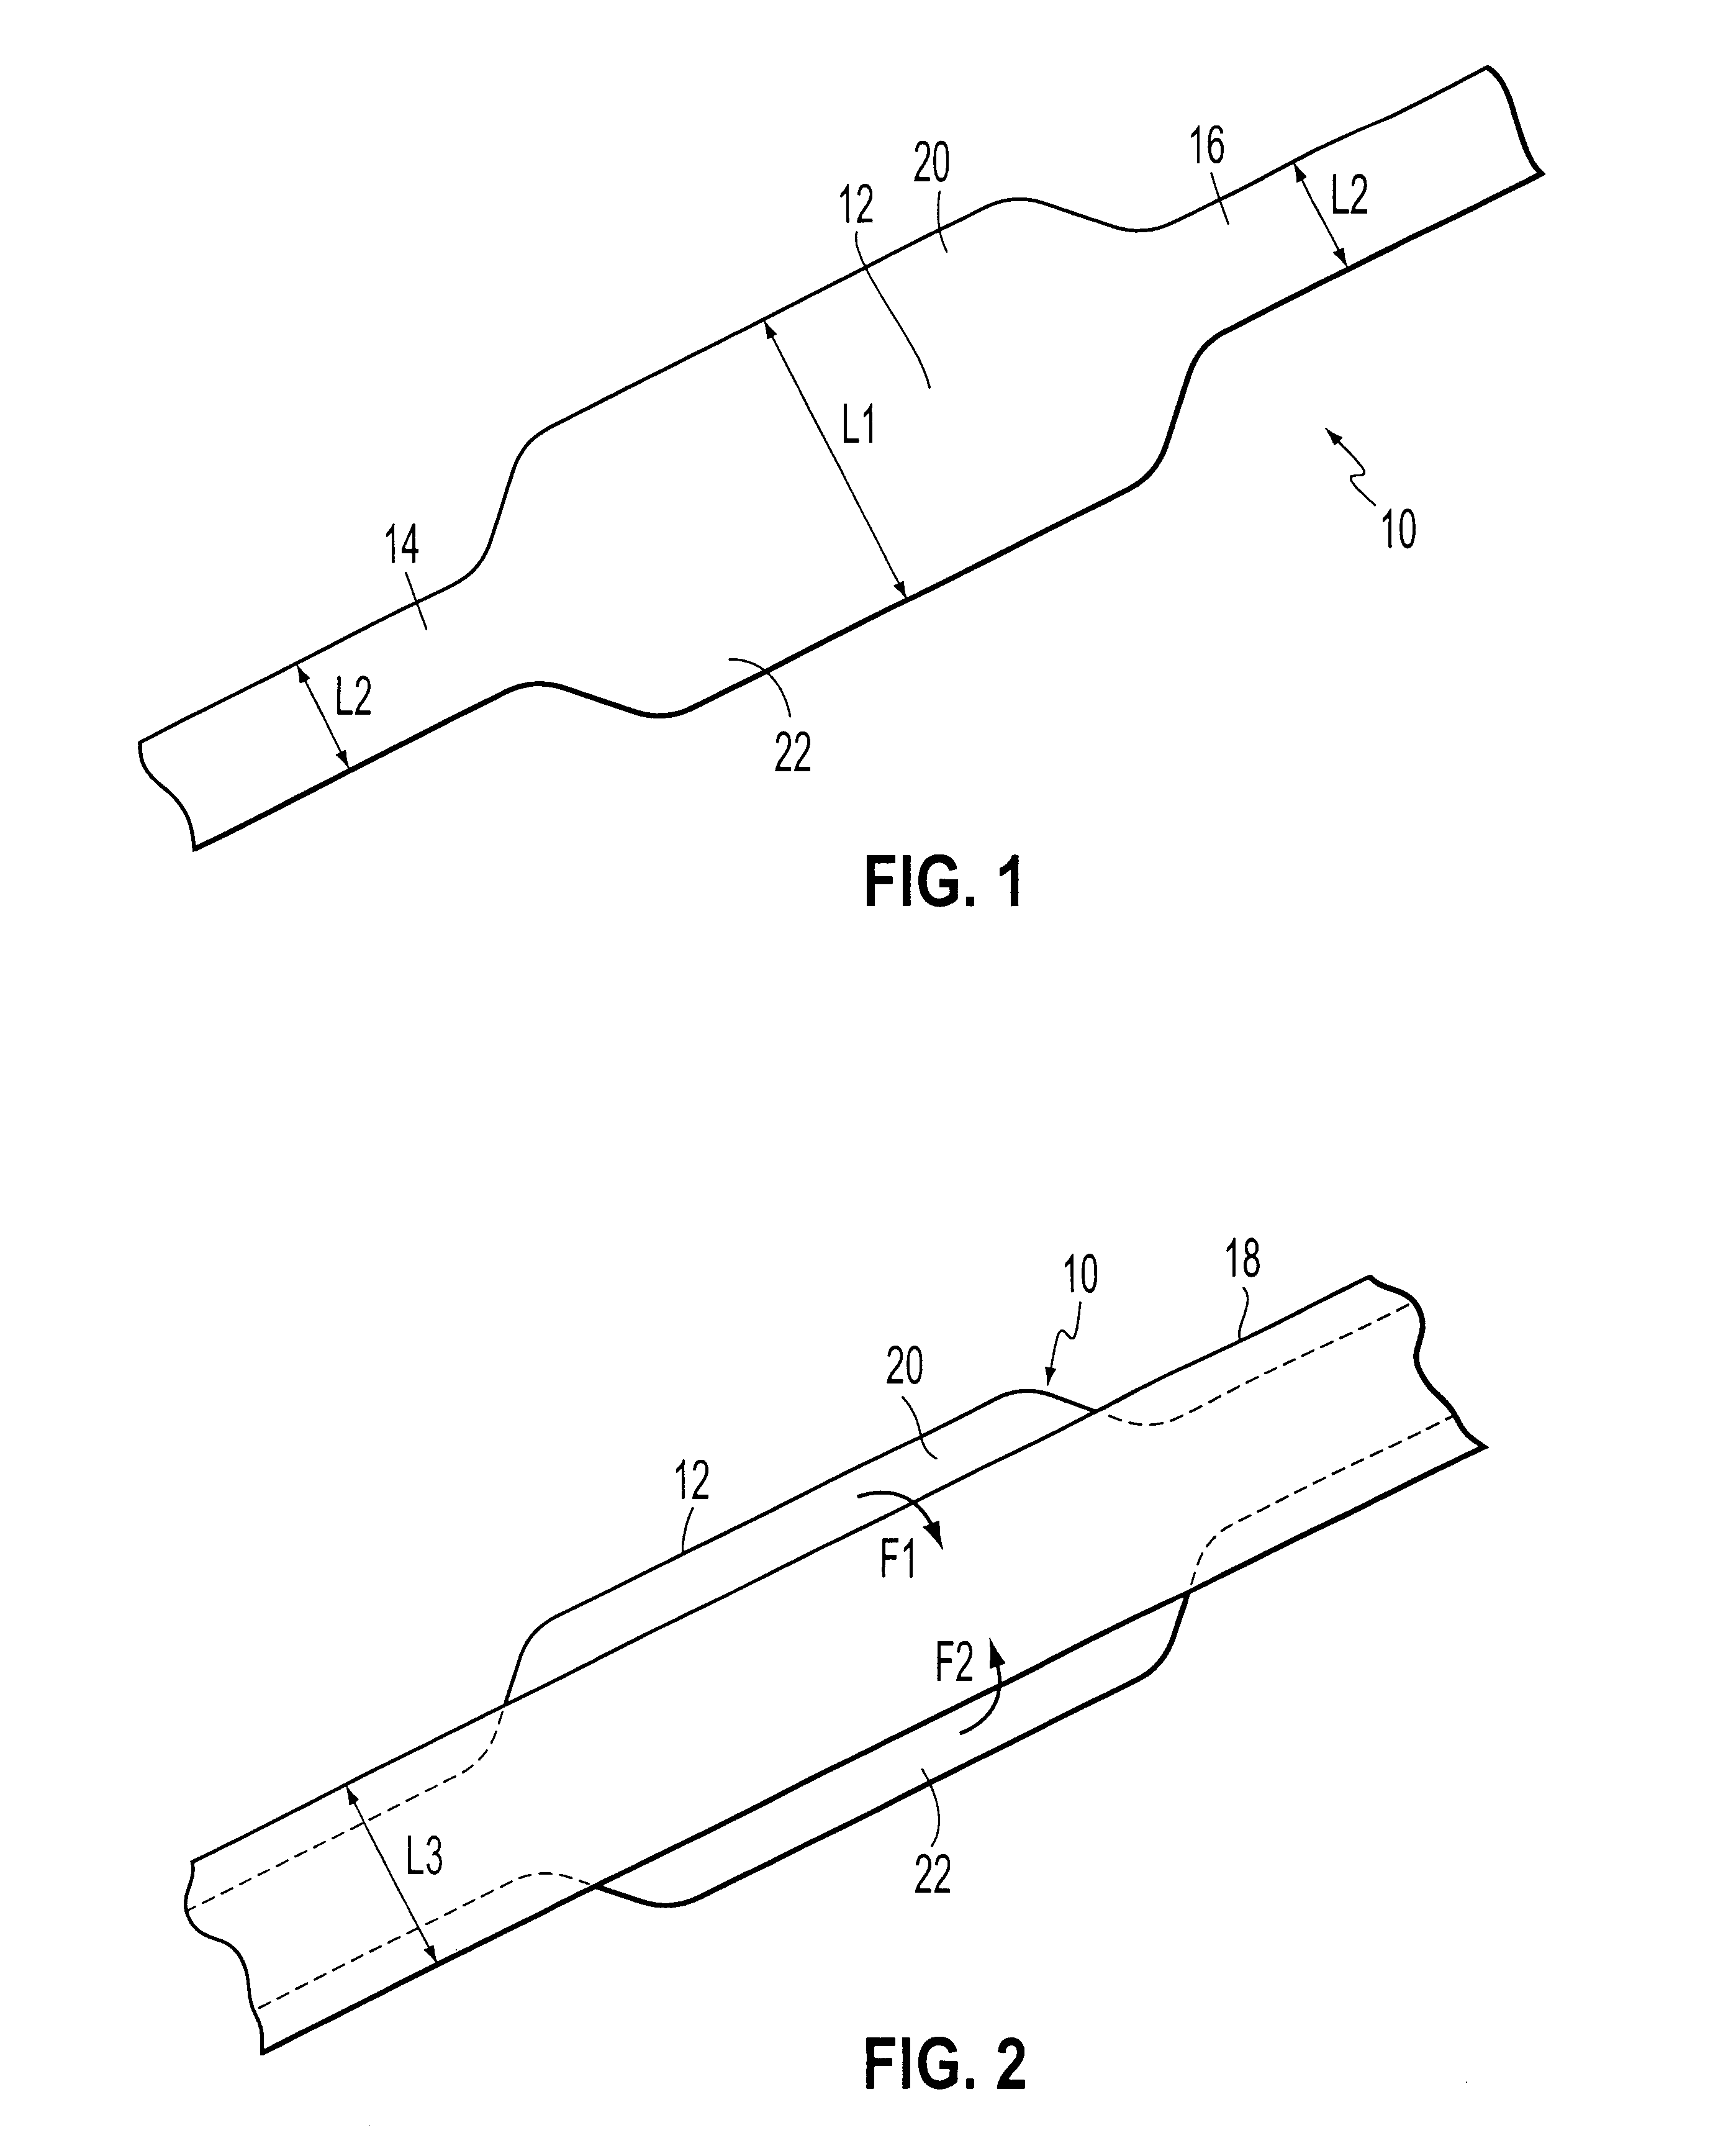 Manufacturing process of a wear resistant attachment device for a sit harness or roping harness, and attachement device with a strap obtained according to the process